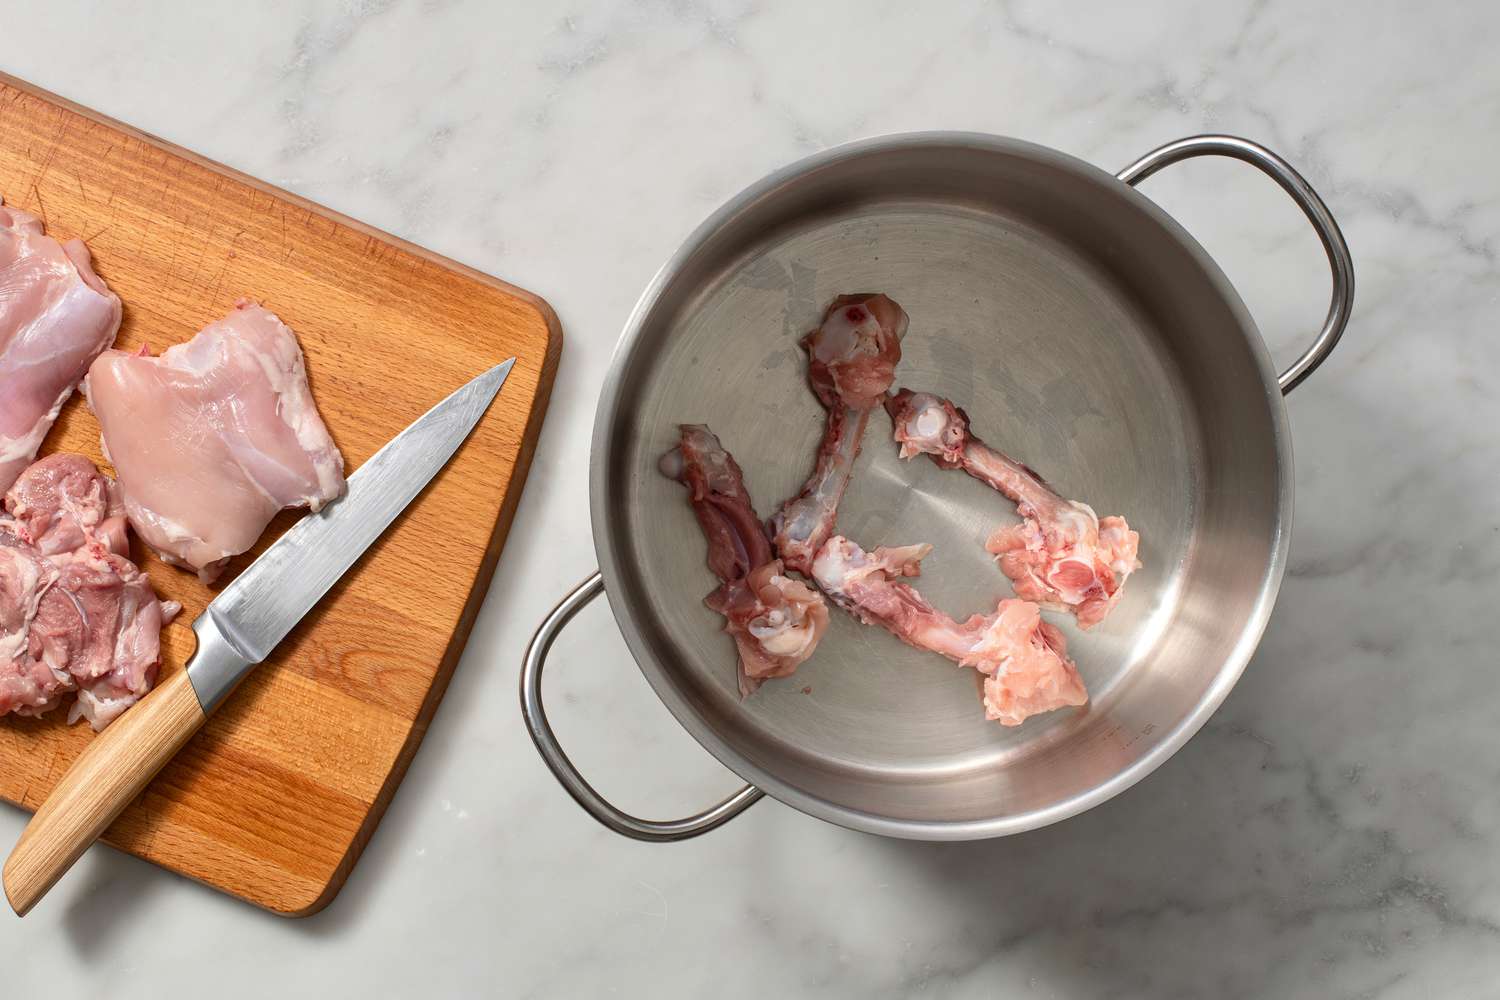 chicken bones in large pot with meat on cutting board